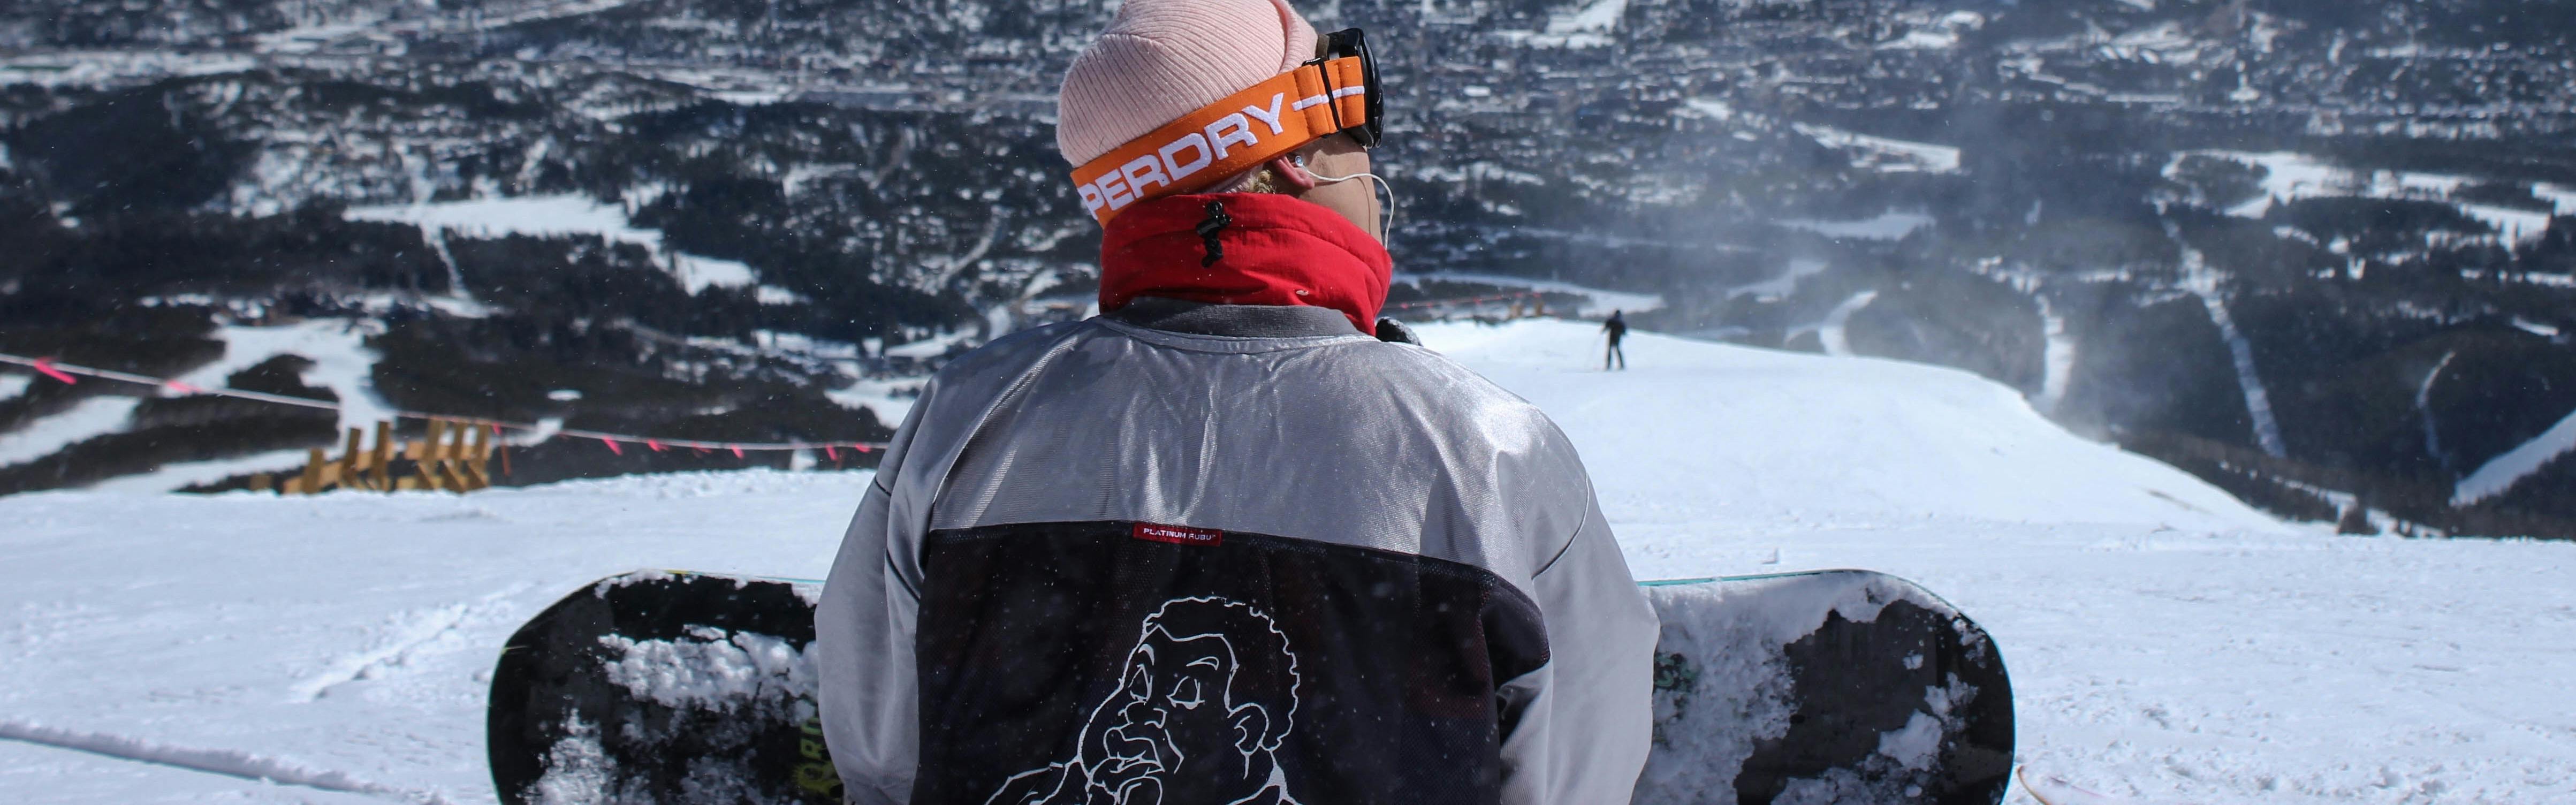 A snowboarder sitting at the top of the slope